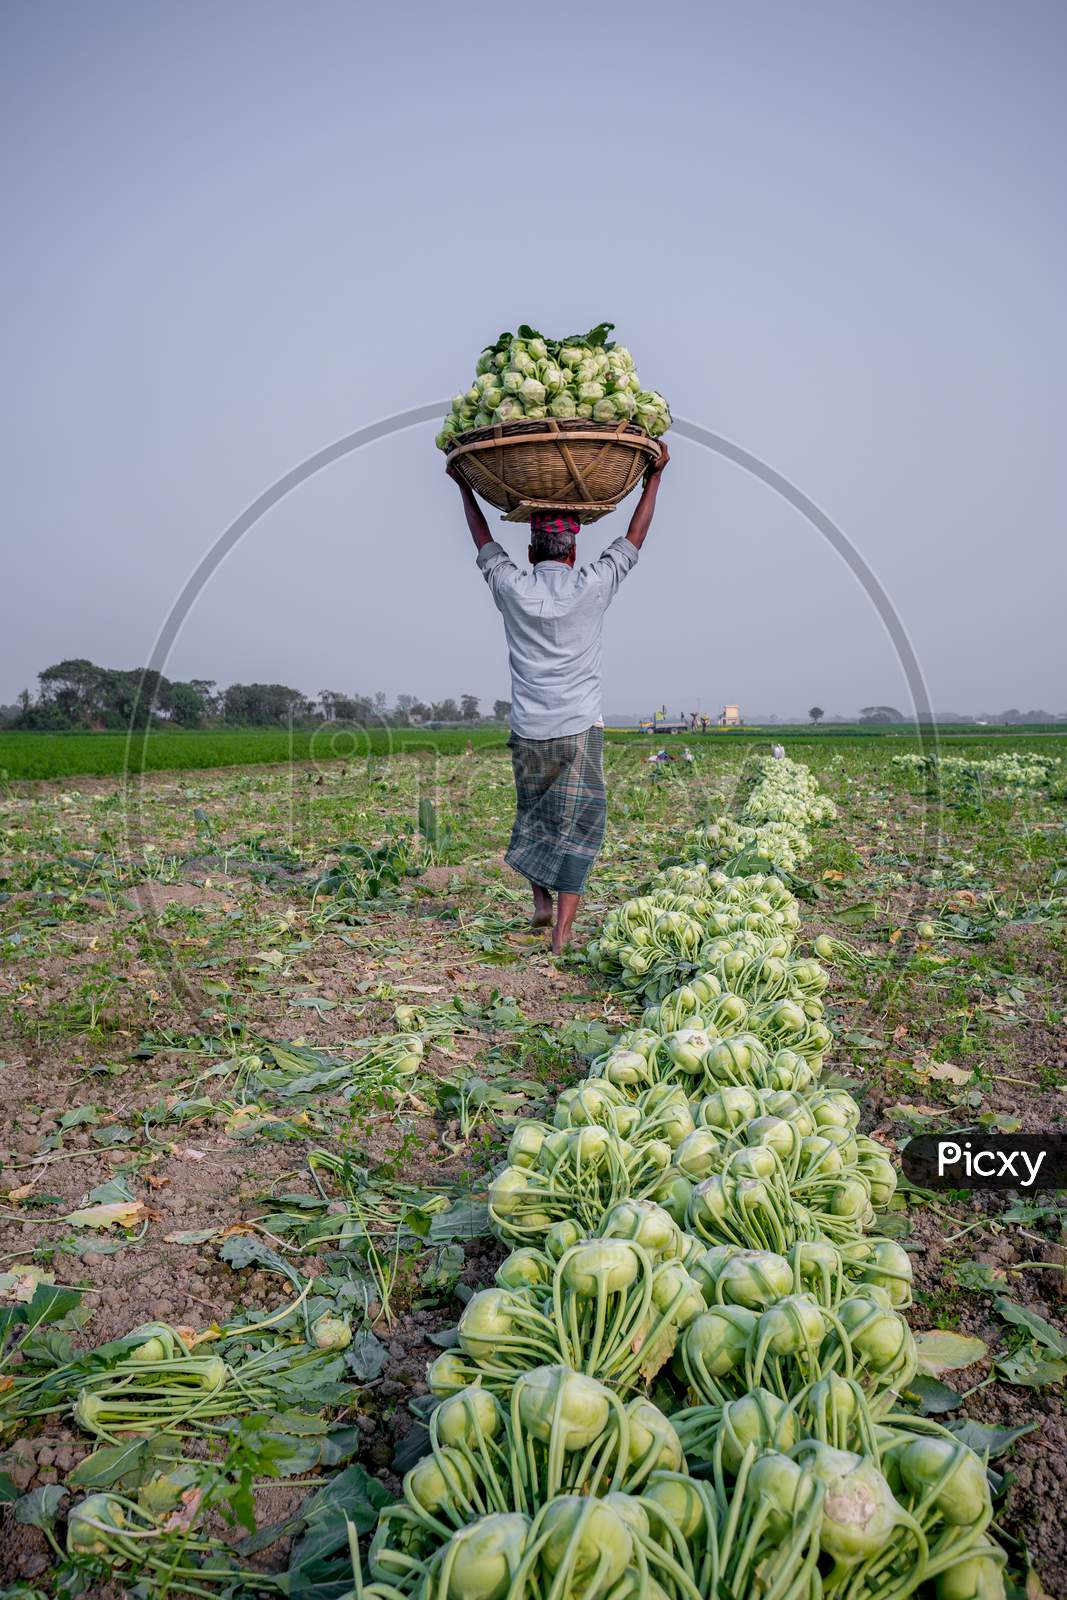 Bangladesh – January 24, 2020: A Worker Is Carrying Kohlrabi Cabbage In His Head For Exporting In Local Market At Savar, Dhaka, Bangladesh.